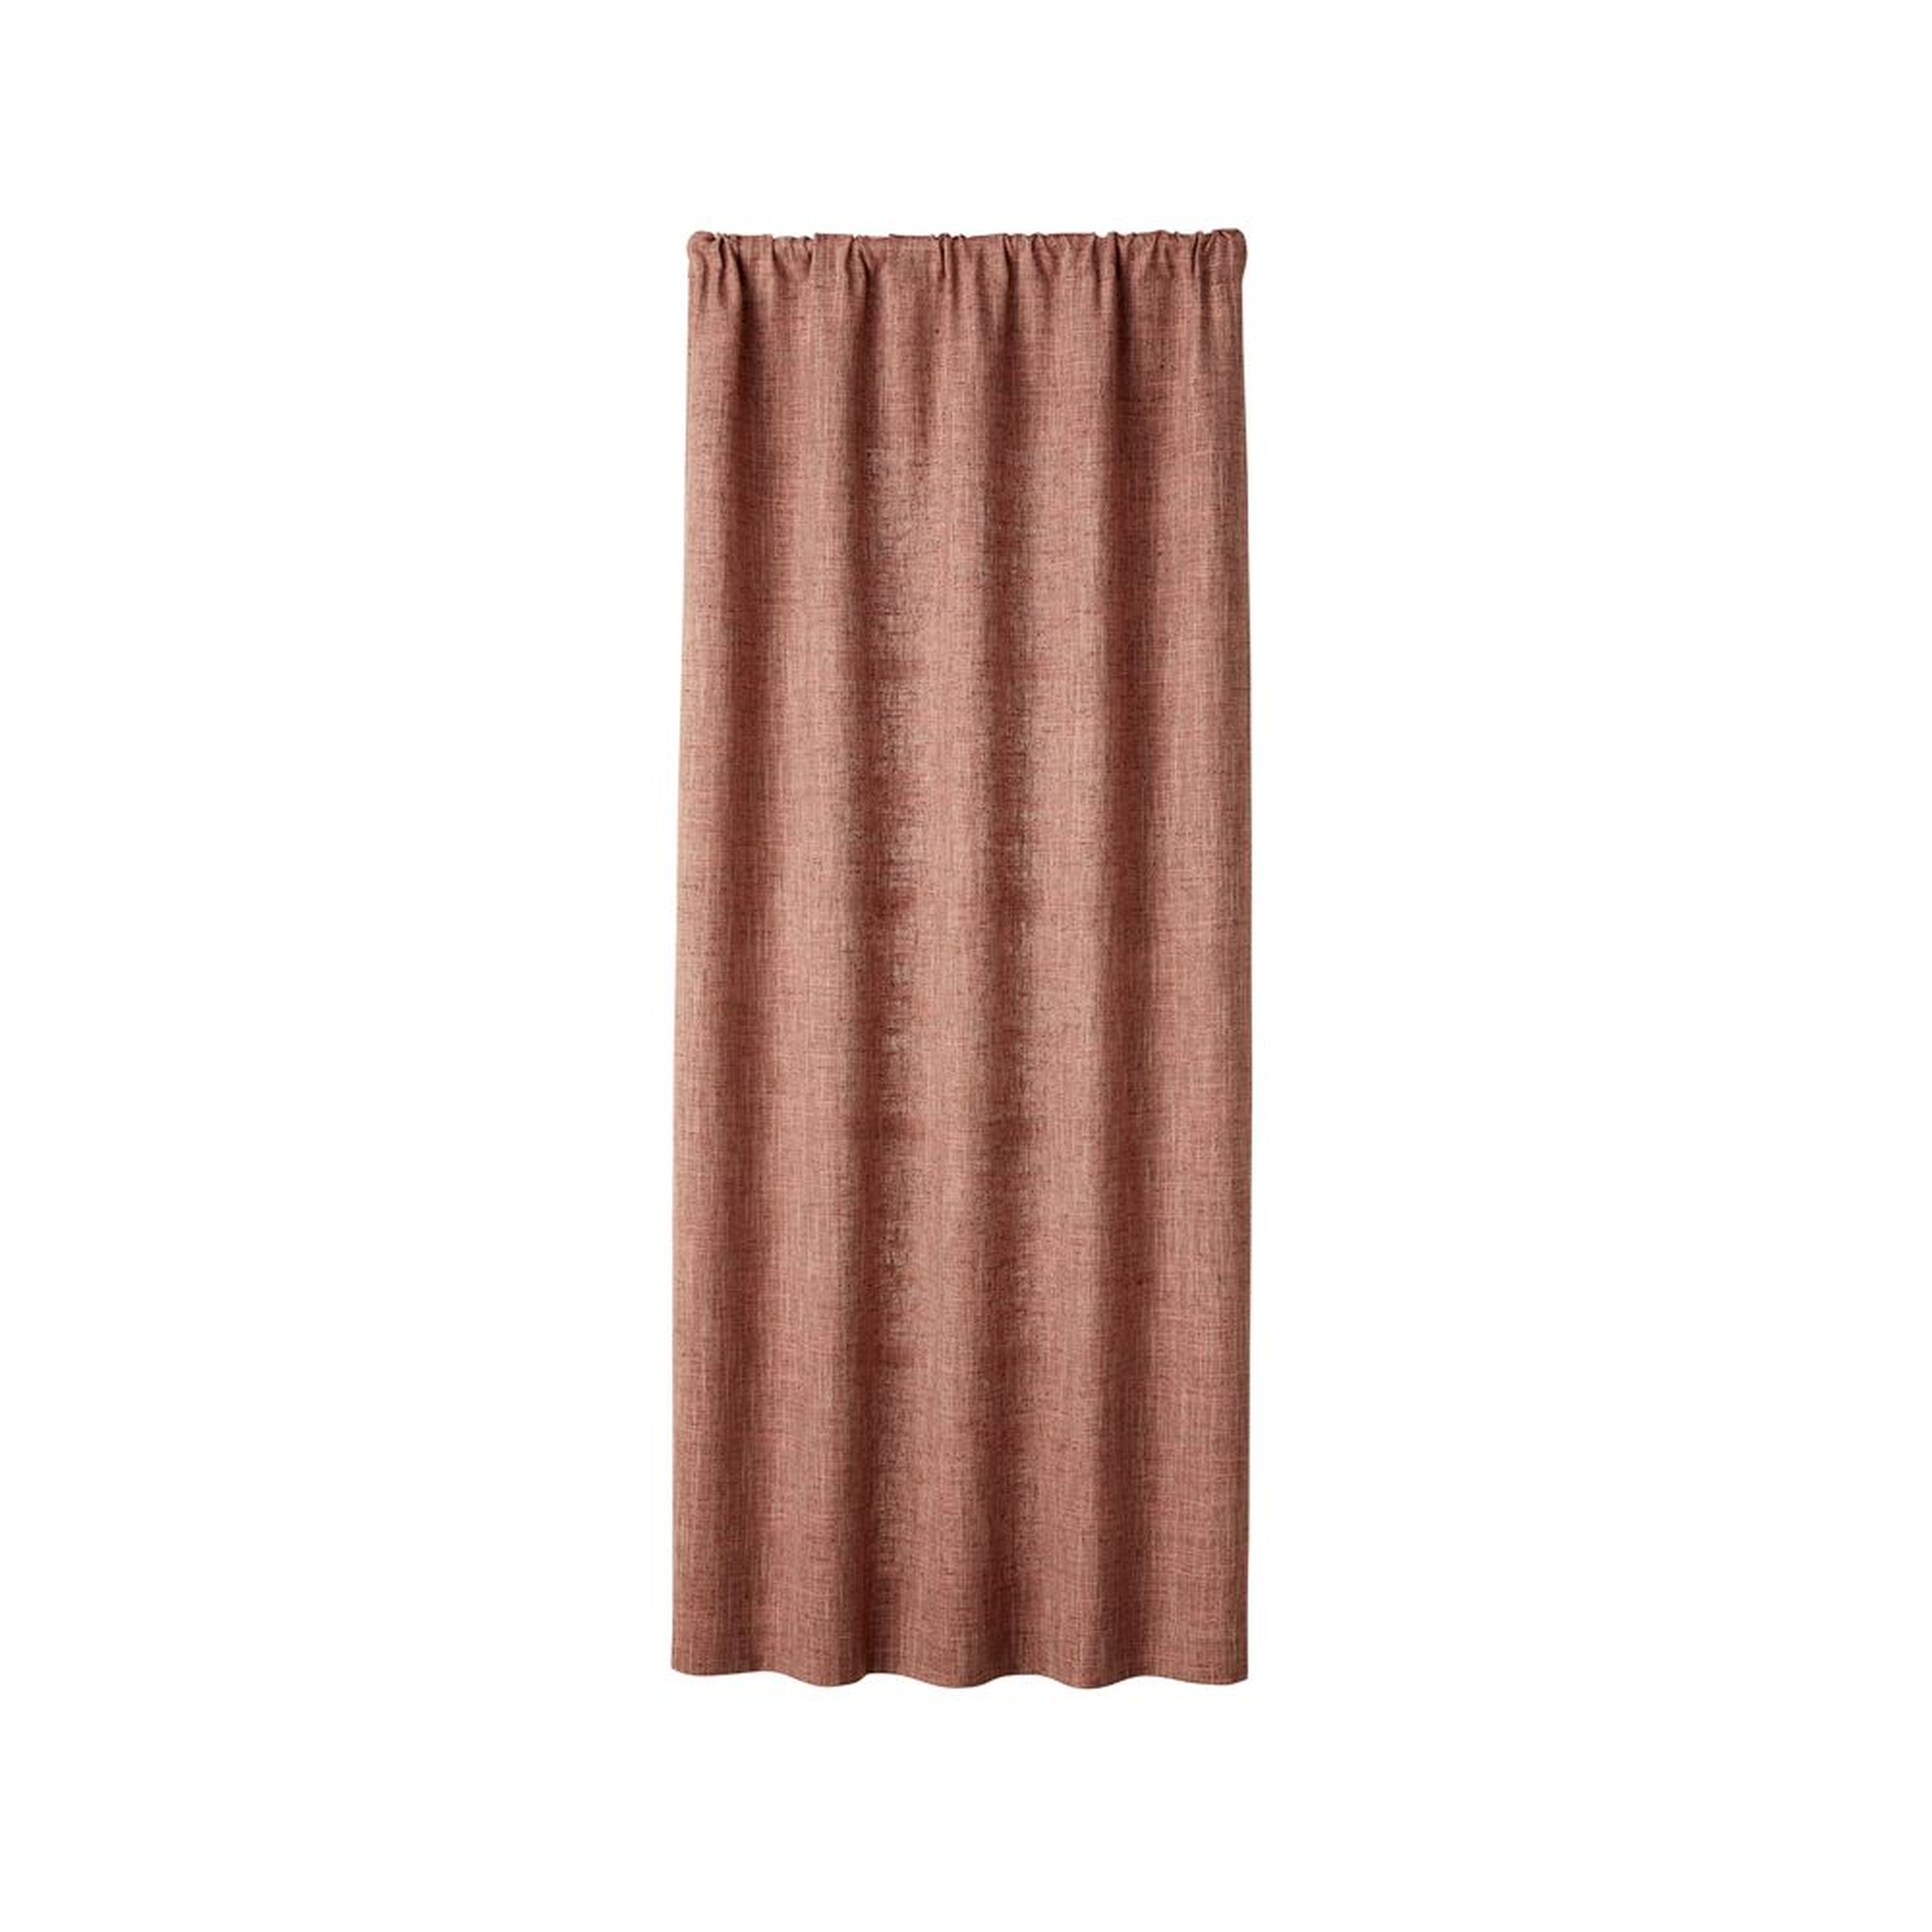 Reid Canyon Curtain Panel 48"x96" - Crate and Barrel